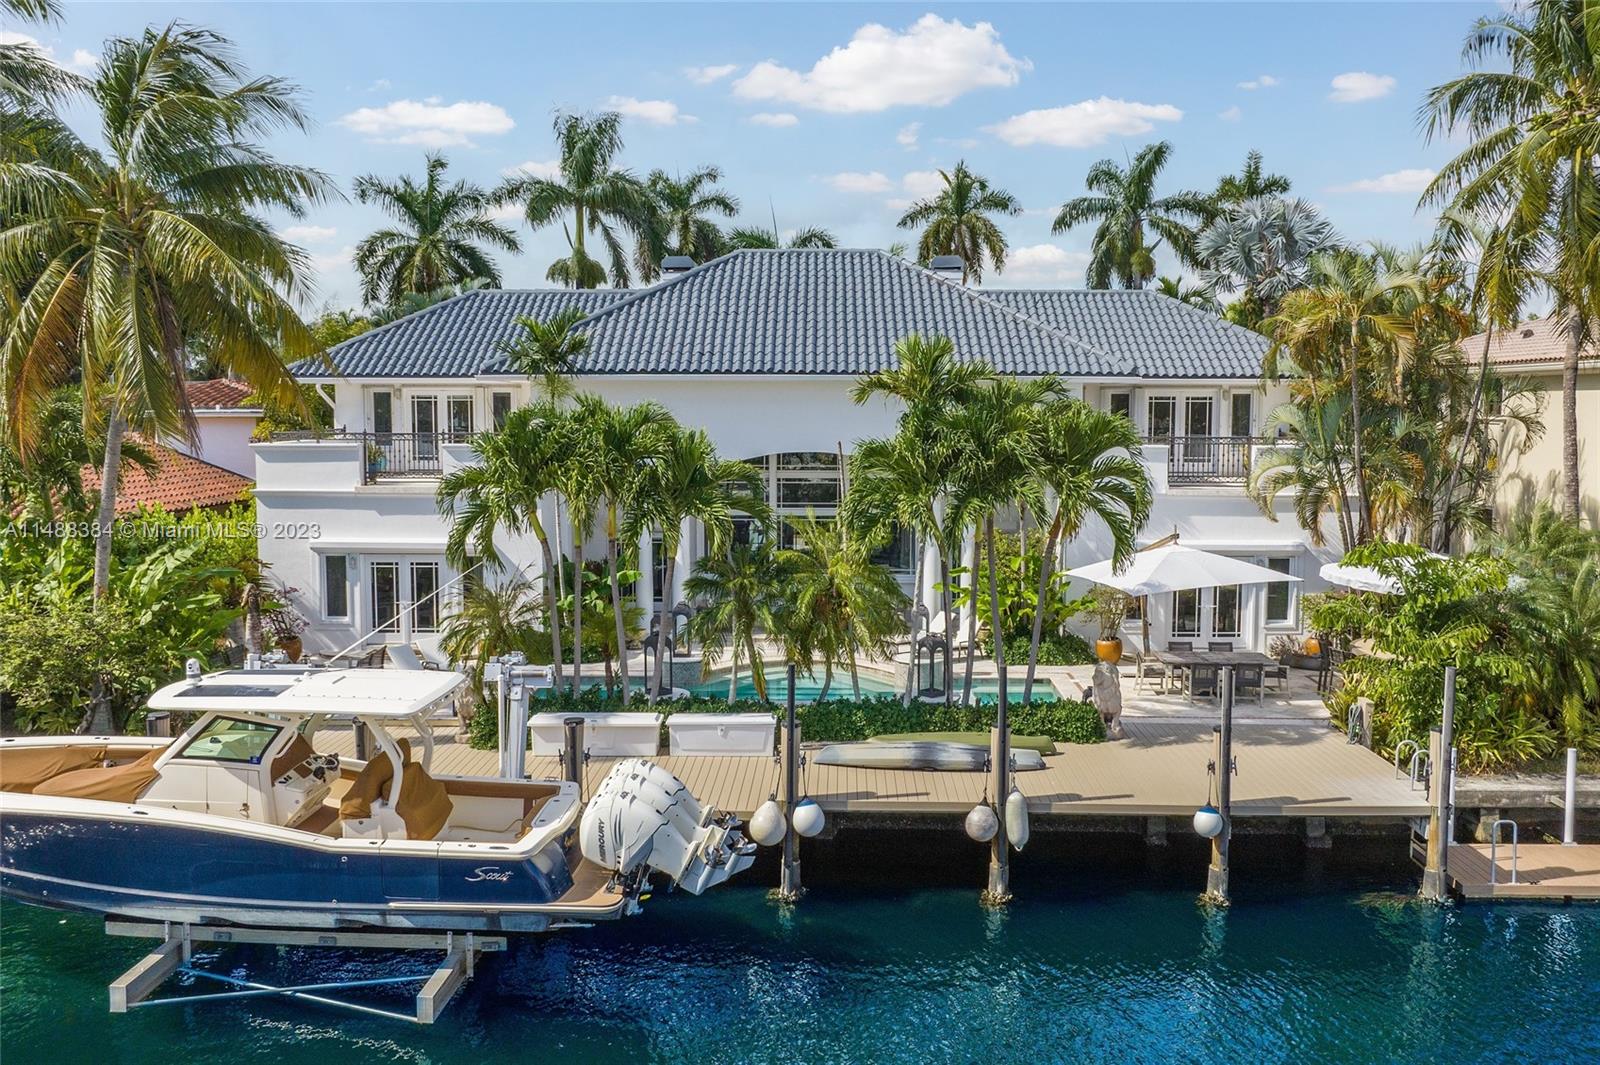 Property for Sale at 166 Royal Palm Dr, Fort Lauderdale, Broward County, Florida - Bedrooms: 5 
Bathrooms: 6.5  - $5,900,000